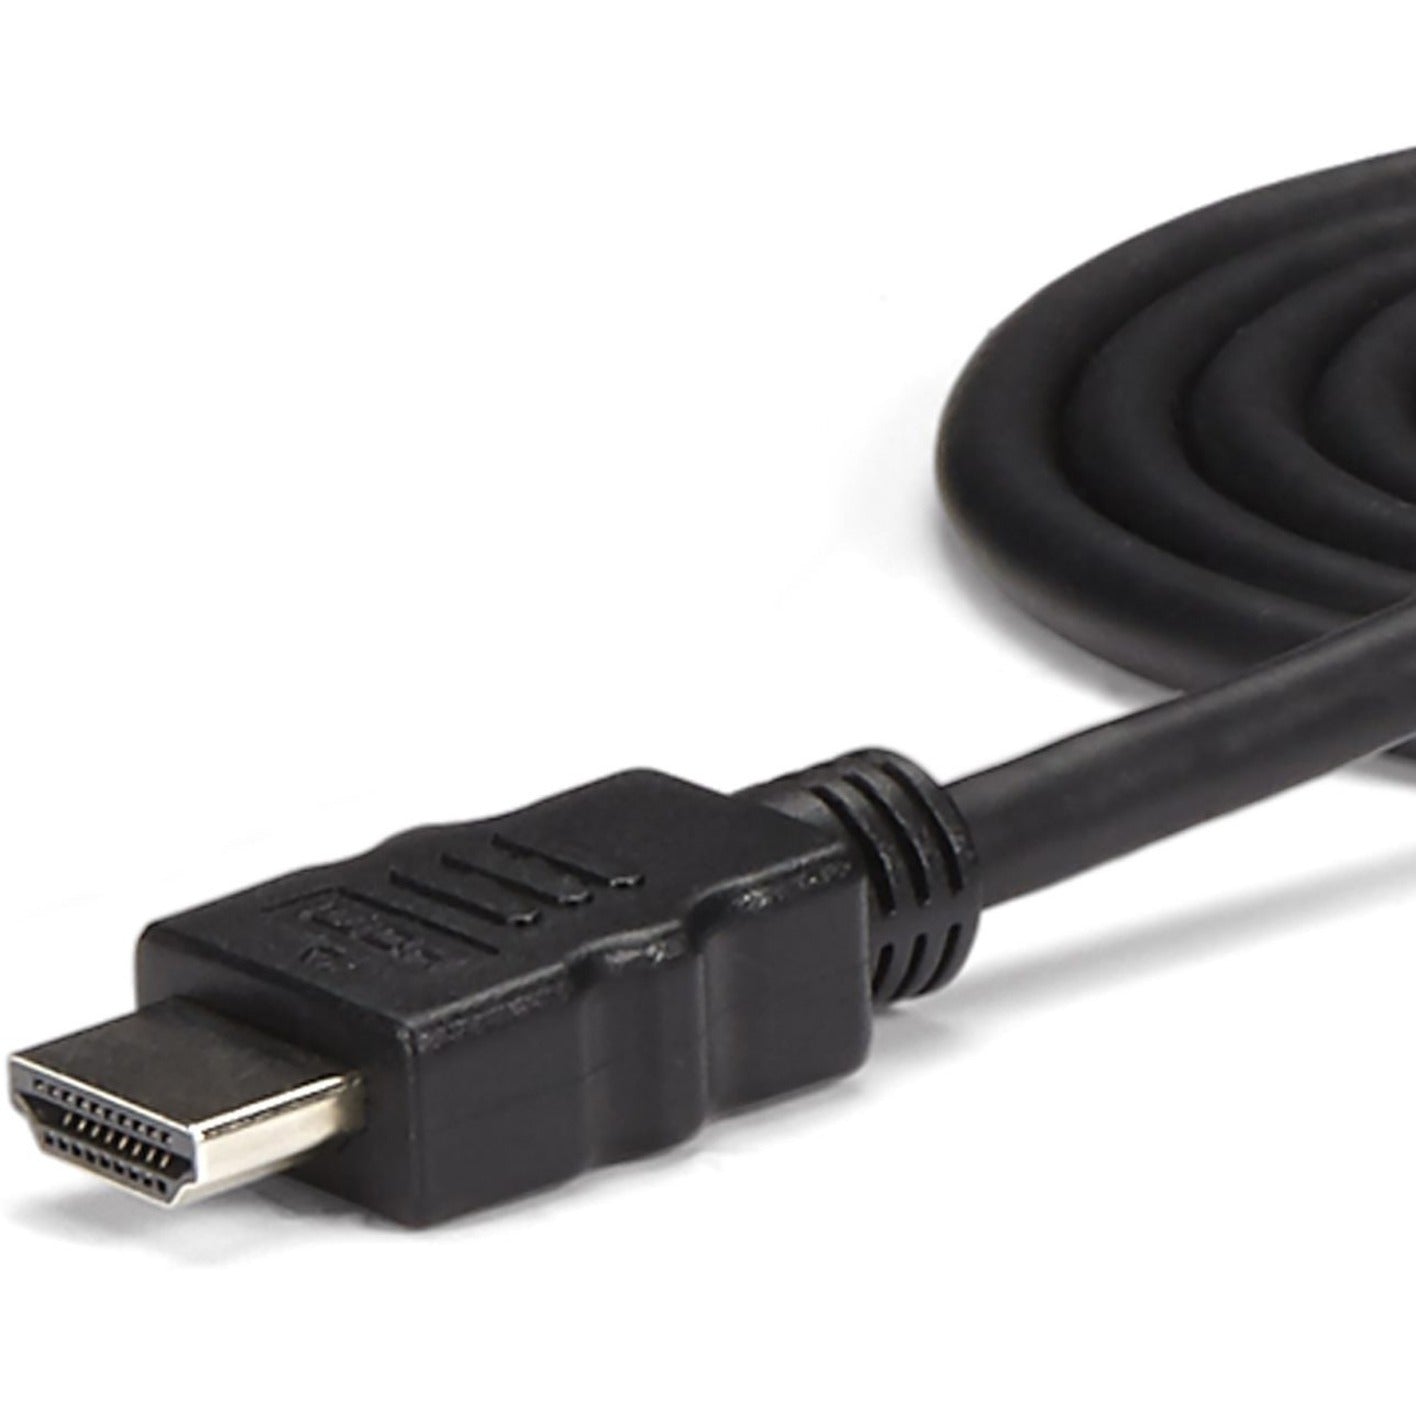 StarTech.com CDP2HDMM1MB USB-C to HDMI Adapter Cable - USB Type-C to HDMI Converter Cable for Computers with USB C, 4K 30Hz